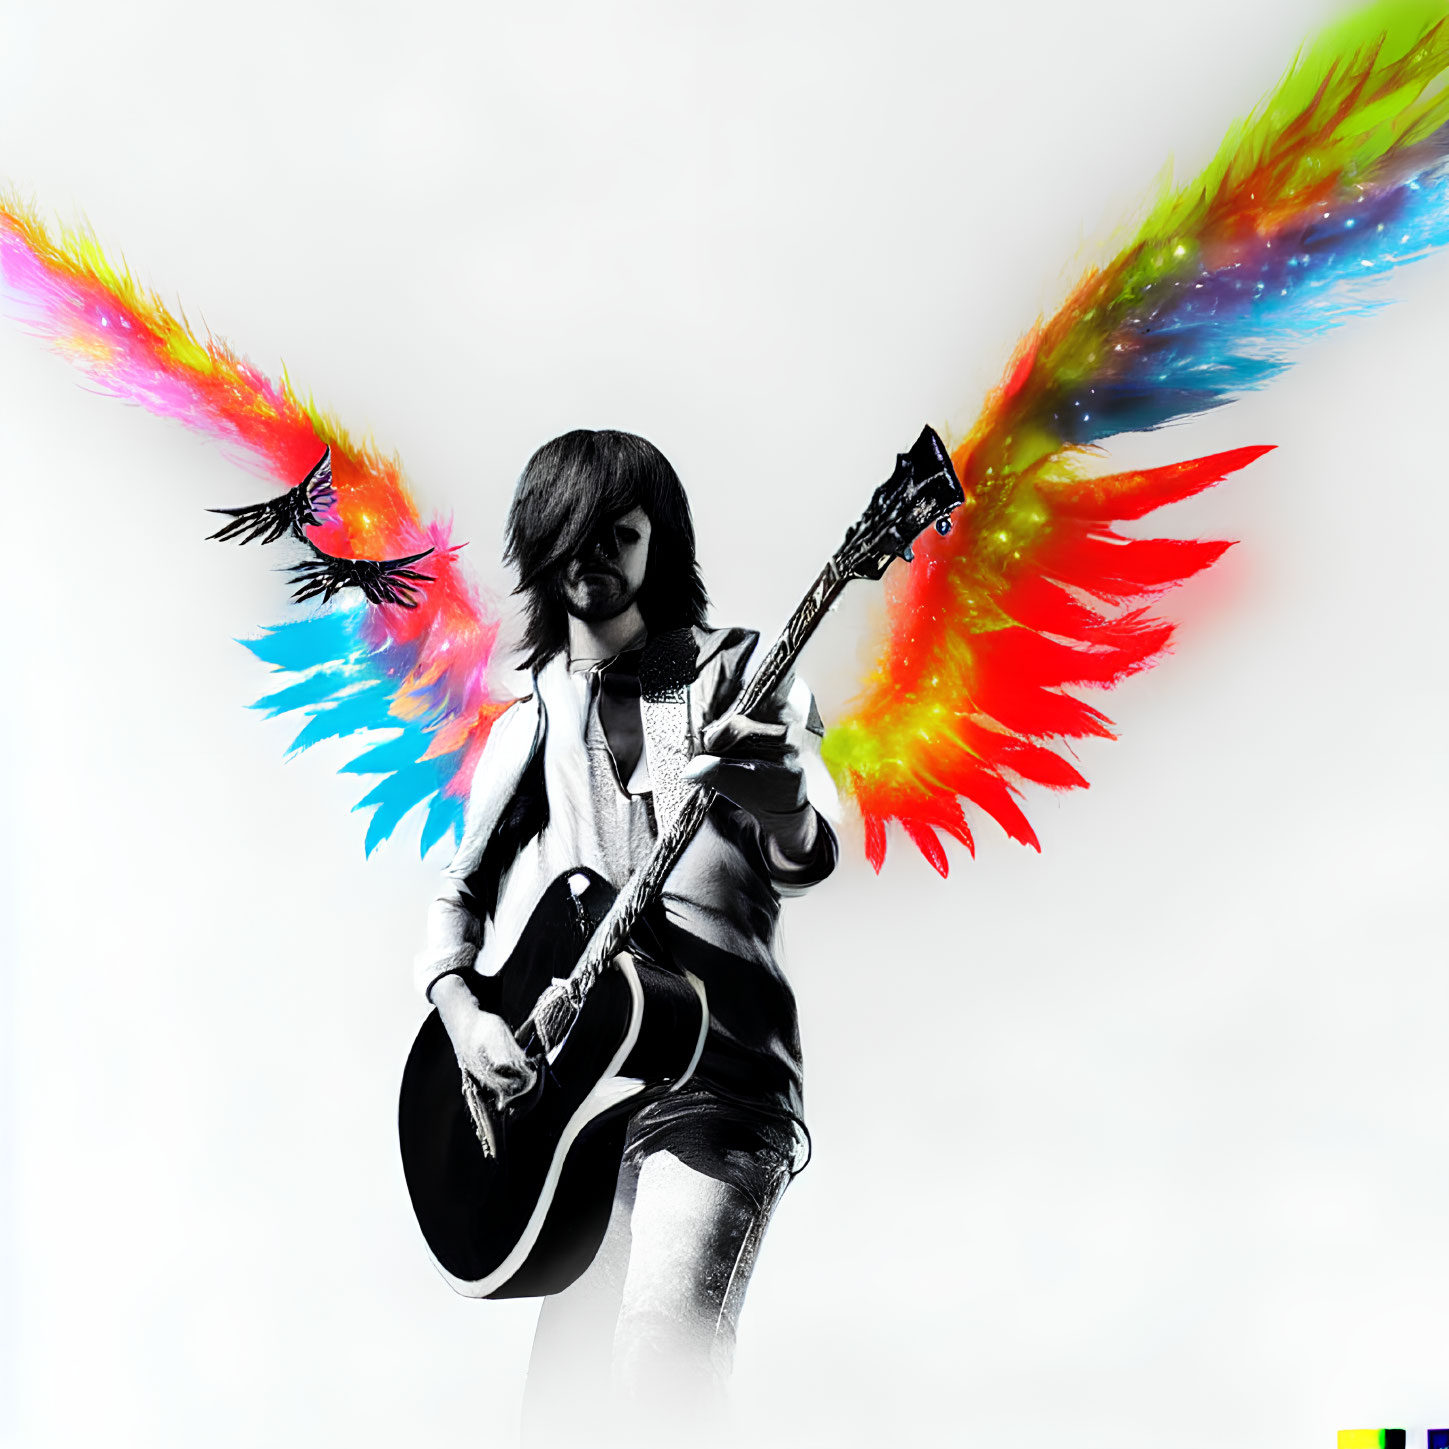 Musician with Guitar Poses with Colorful Wings in Dynamic Image